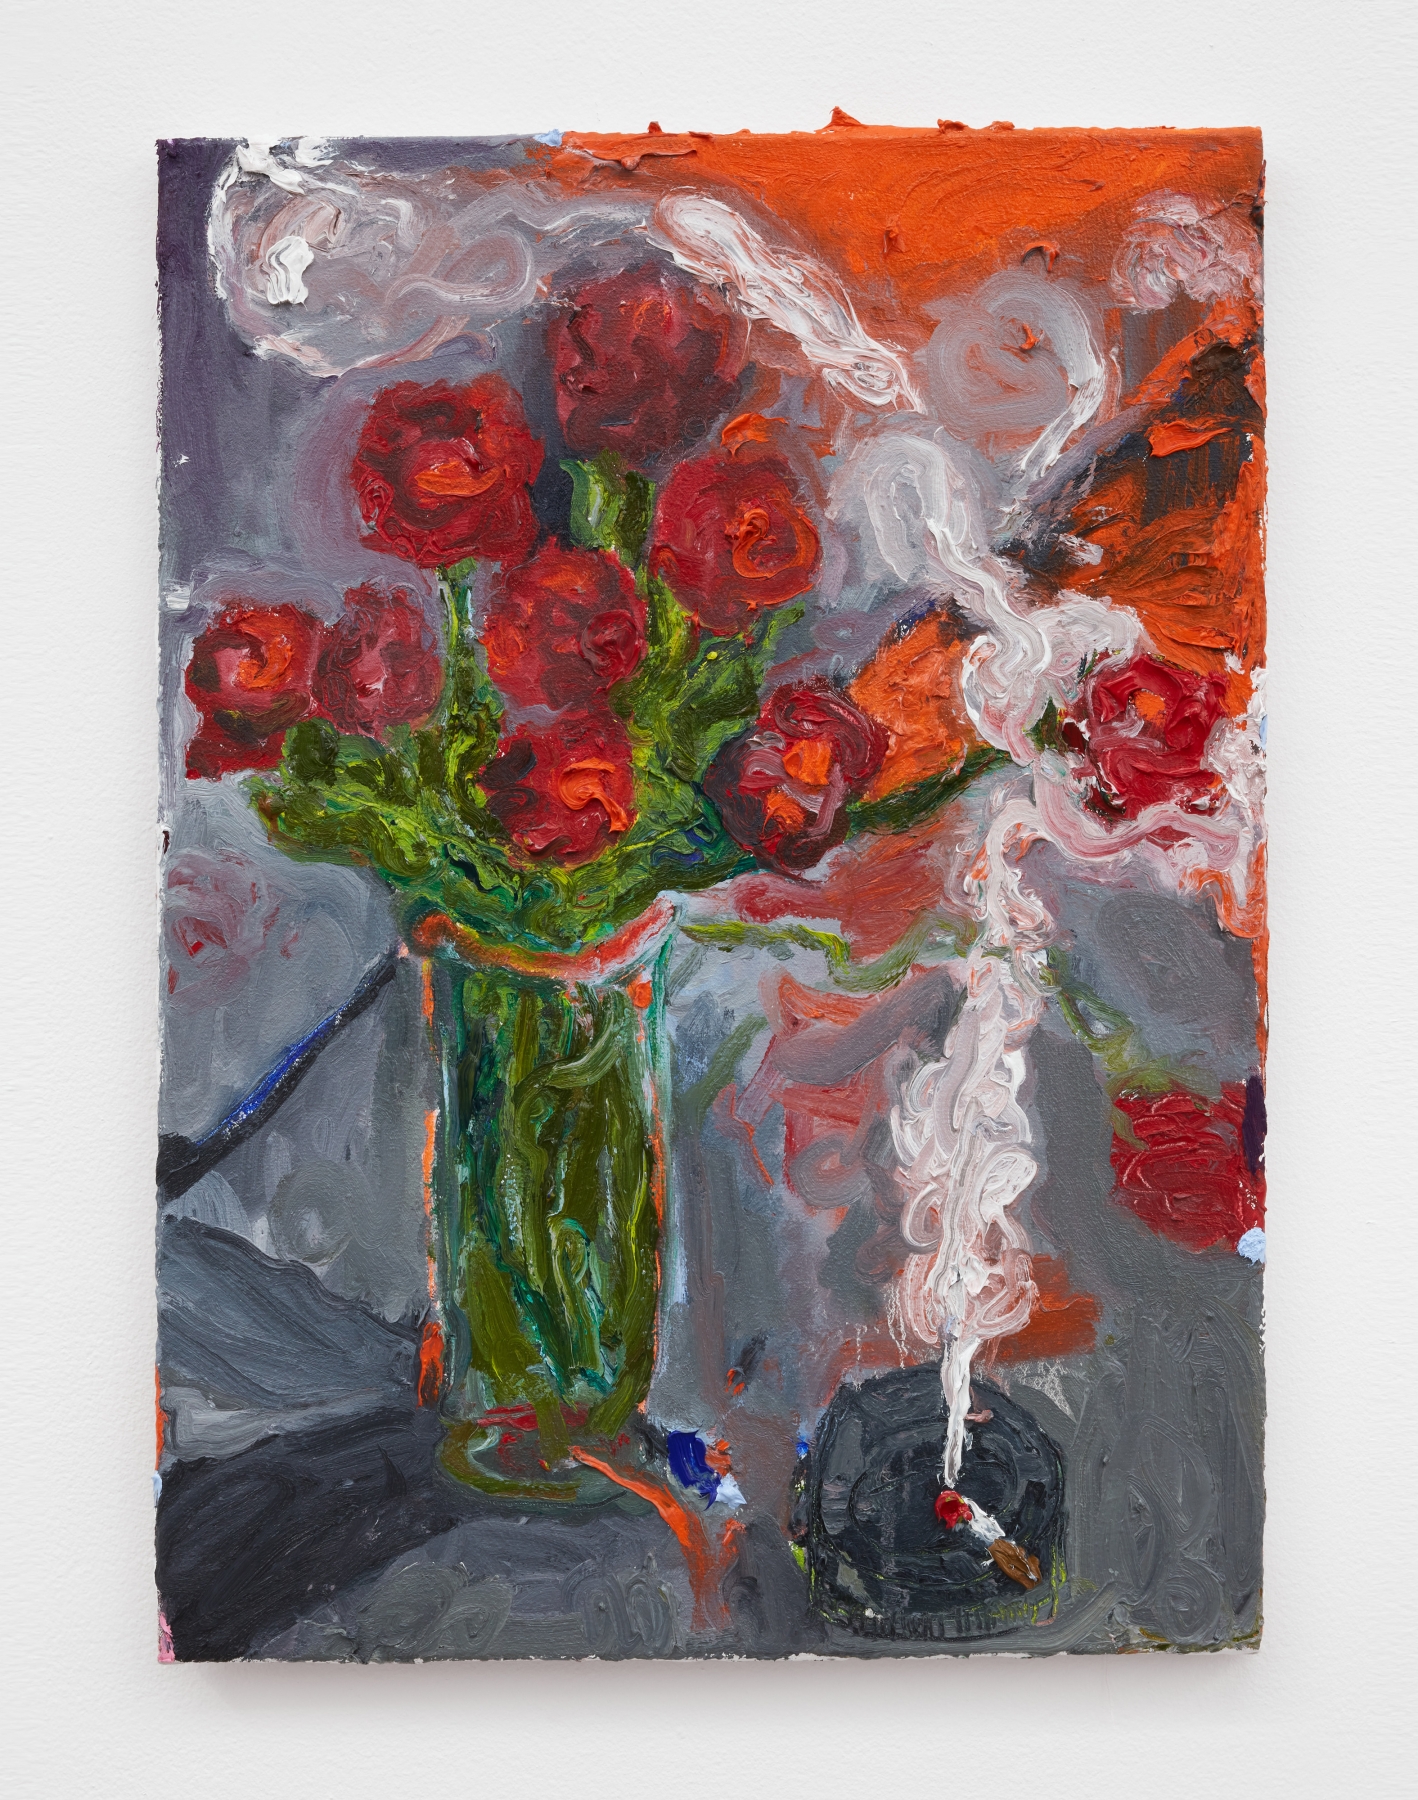 Jason Roberts Dobrin, Untitled (wildfire sunlight light, red roses and smoking cigarette in black ashtray), 2021

800px